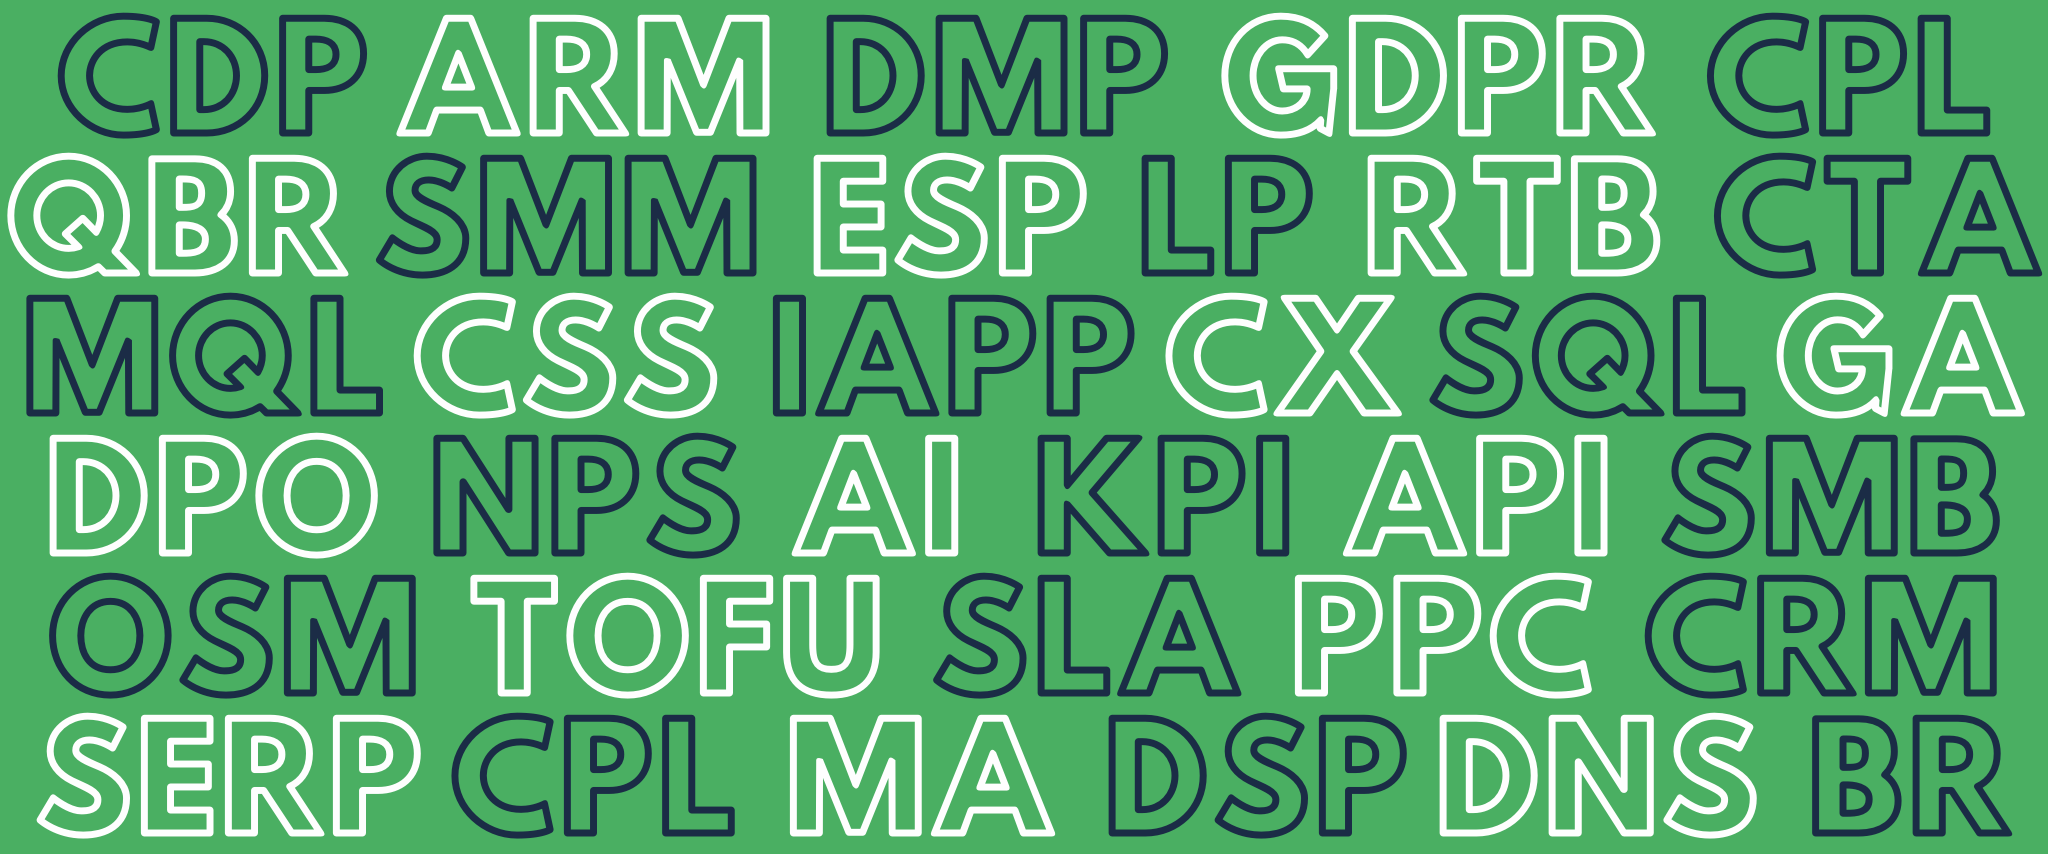 100 Business Abbreviations and Professional Acronyms To Know